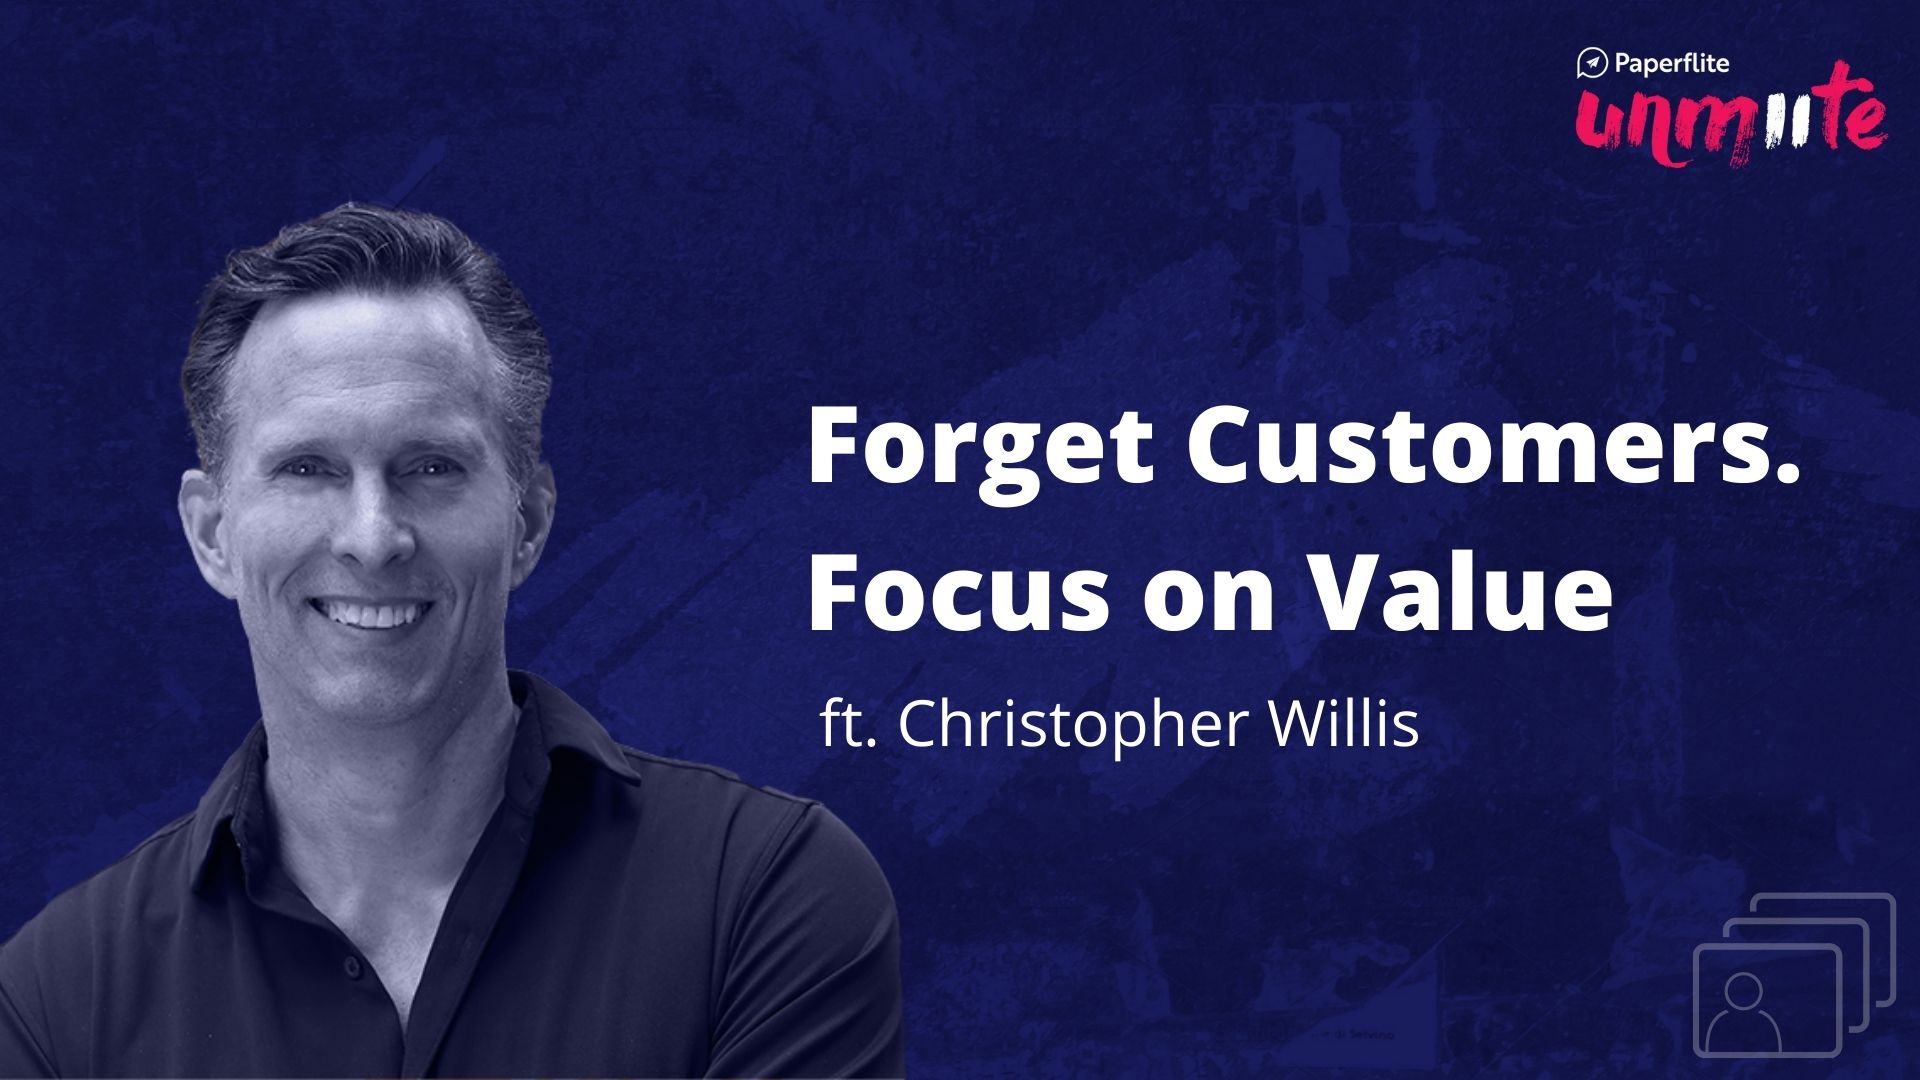 Forget Customers. Focus on Value
